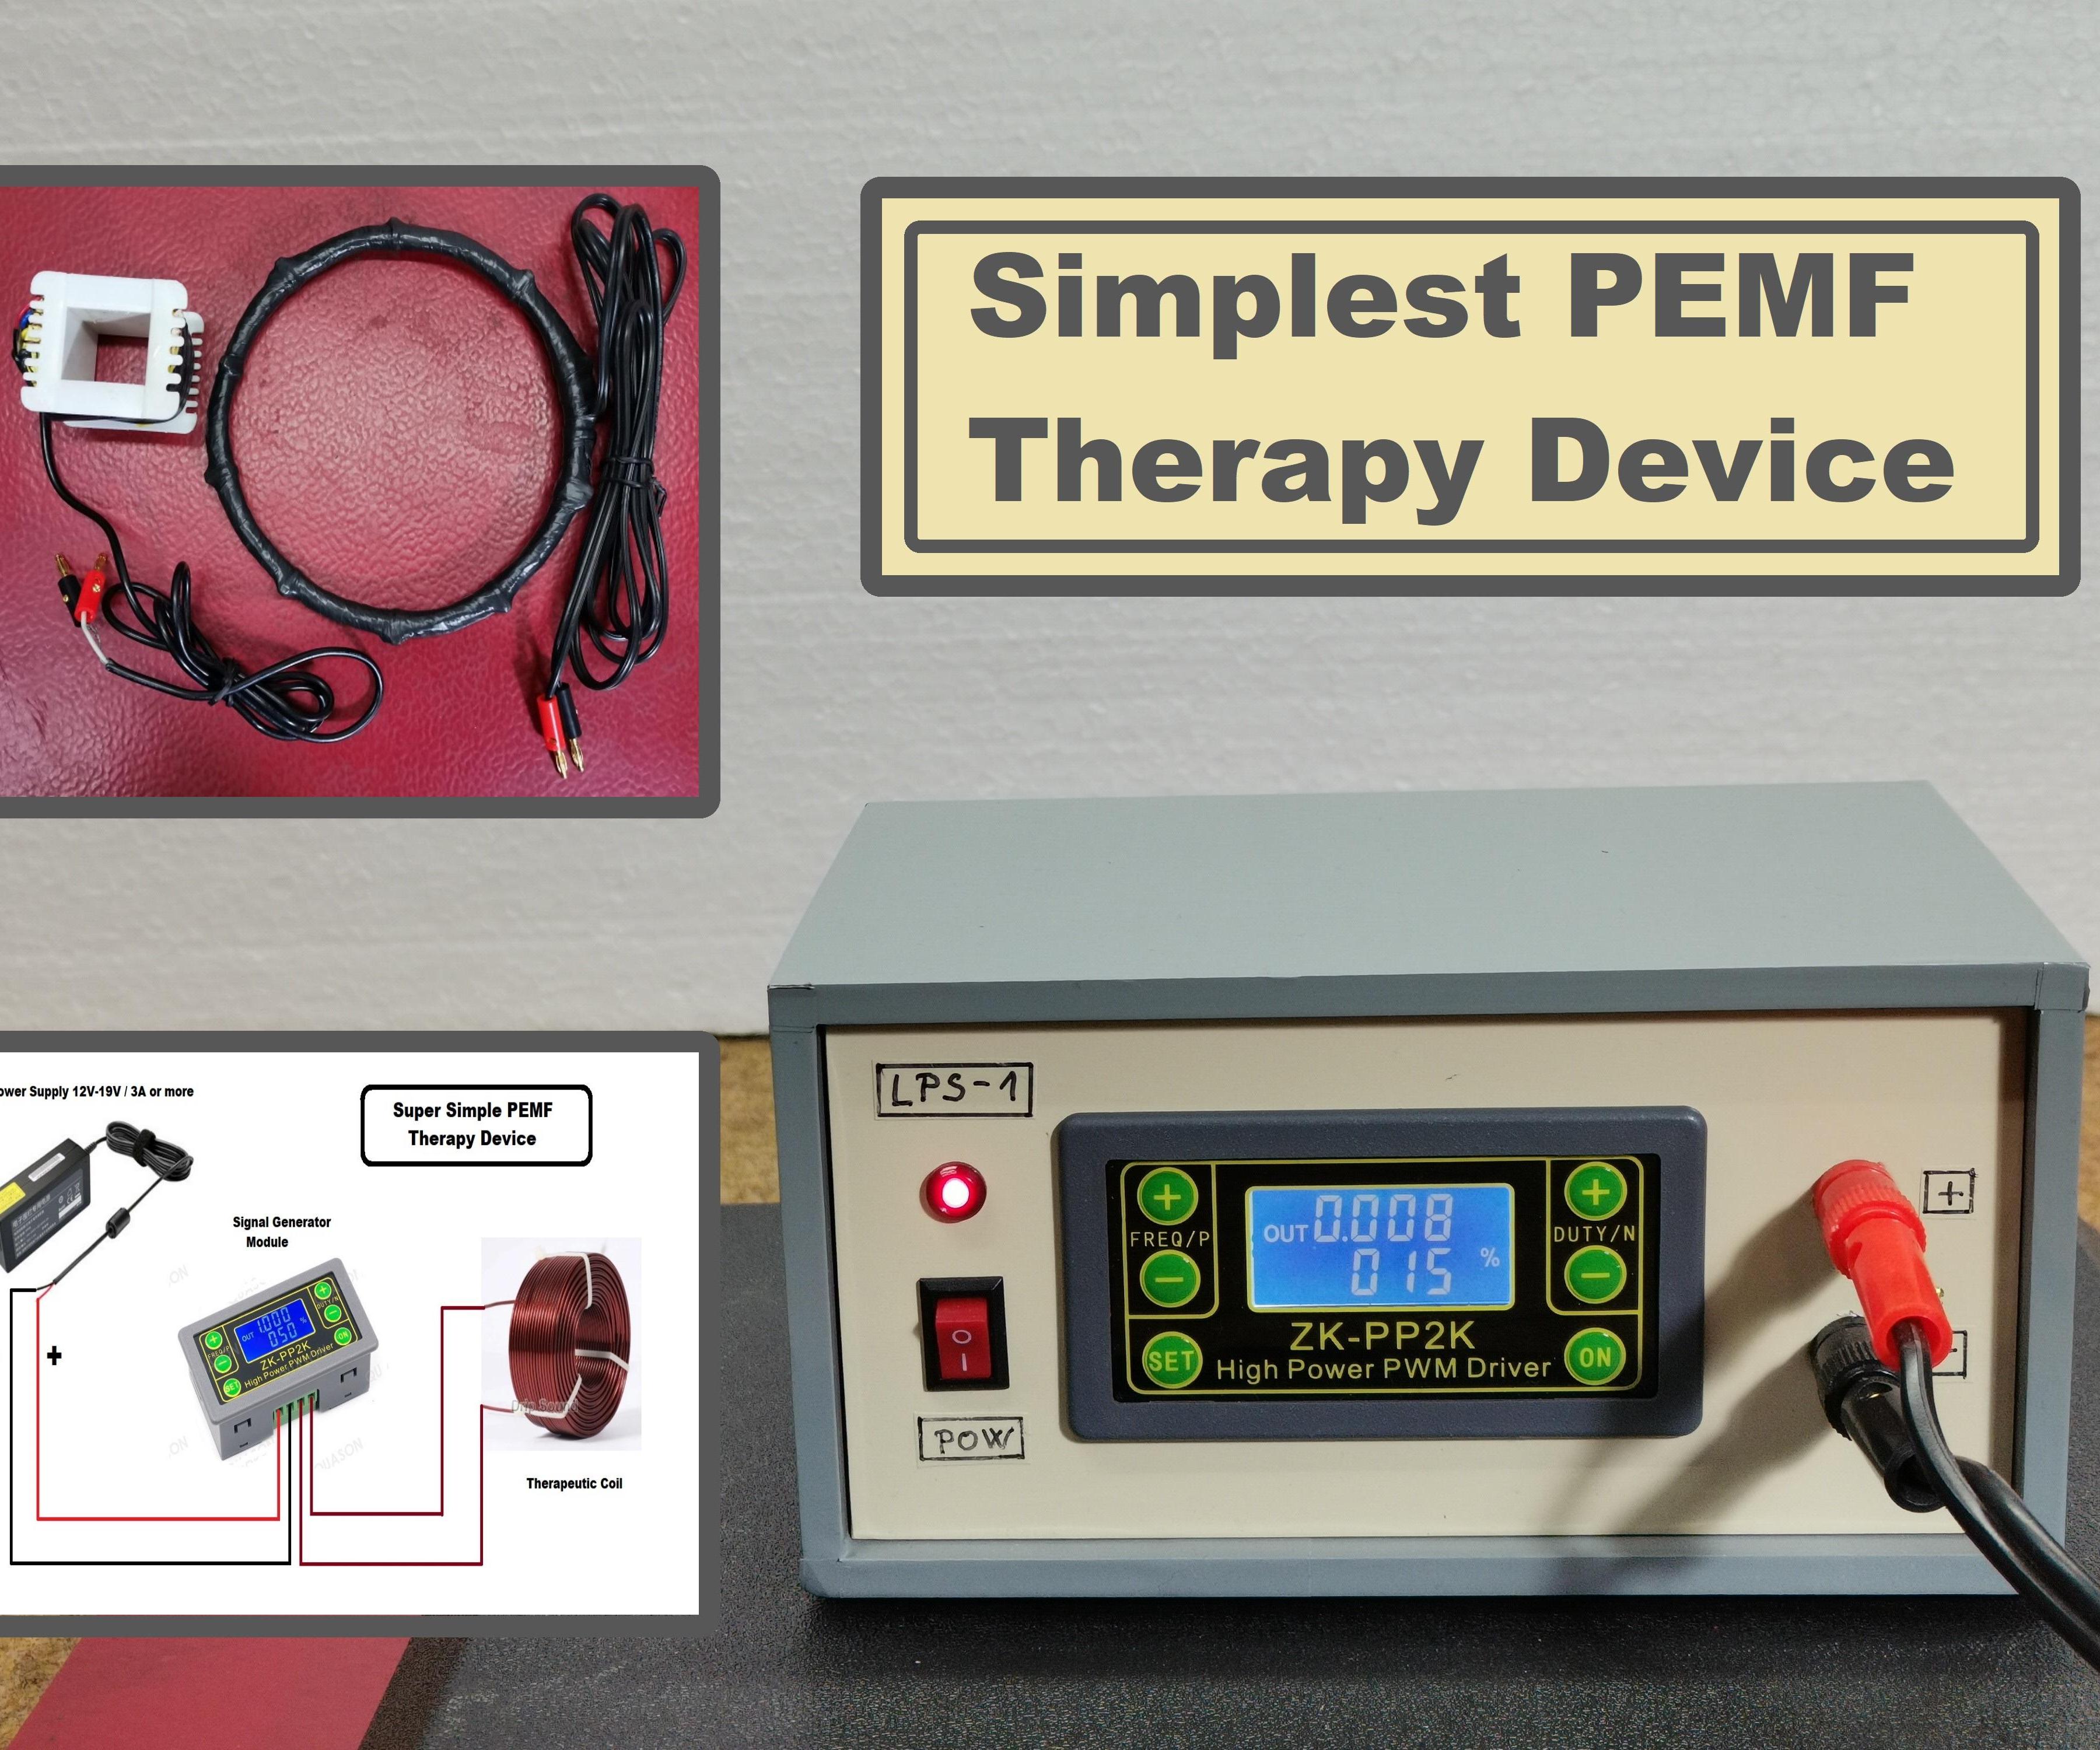 How to Build Simplest PEMF (Pulse Electomagnetic Field) Therapy Device